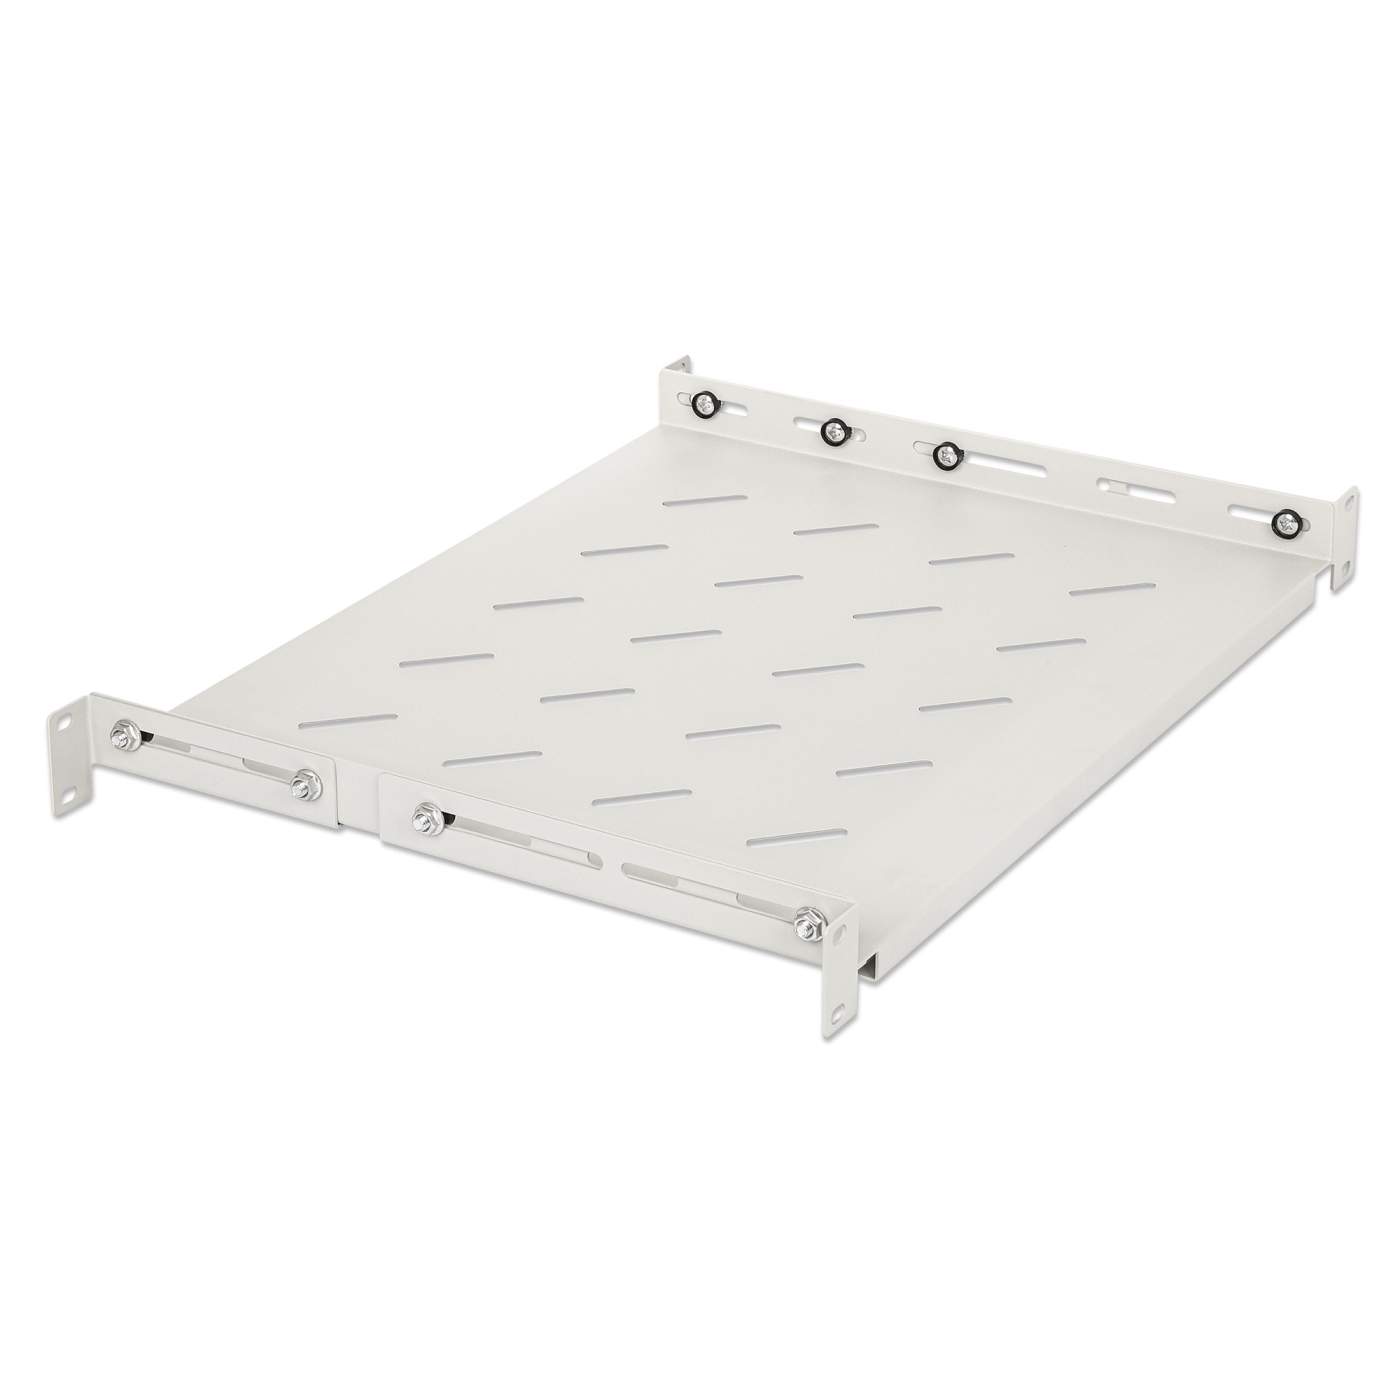 19" Shelf with Variable Rails for Fixed Mounting Image 2